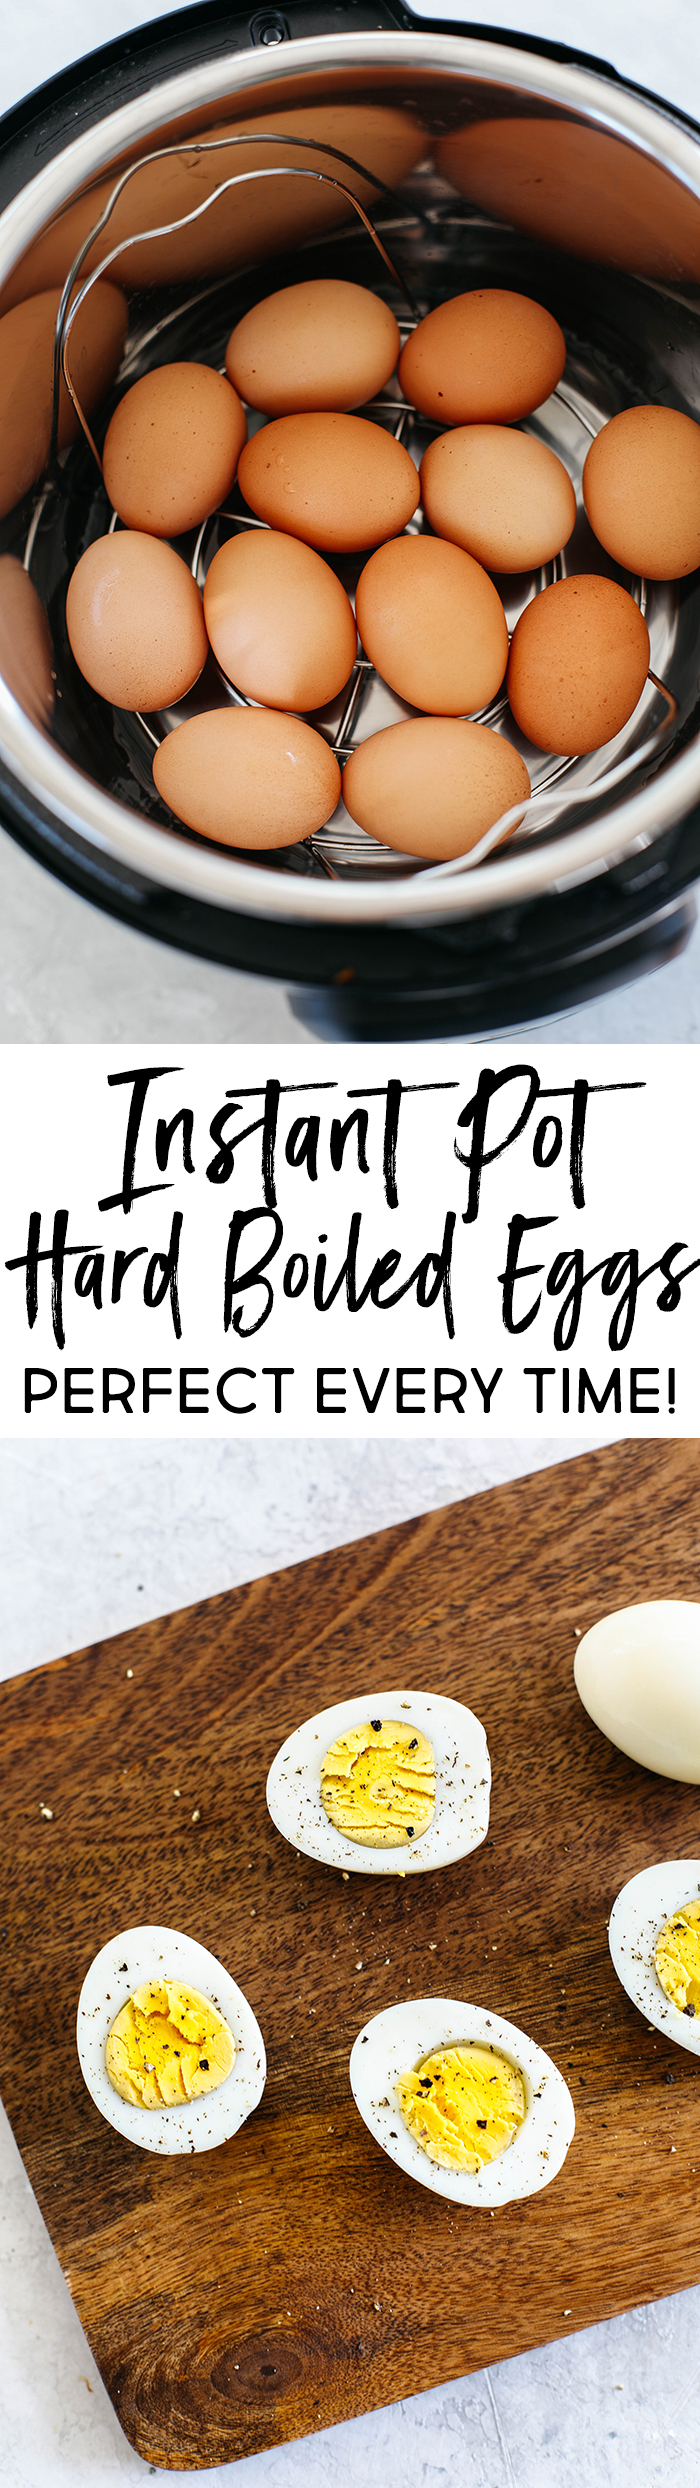 Perfectly cooked hard boiled eggs in the Instant Pot that are easy to peel and ready in just 15 minutes!  Hands down the easiest method and perfect for meal prep!